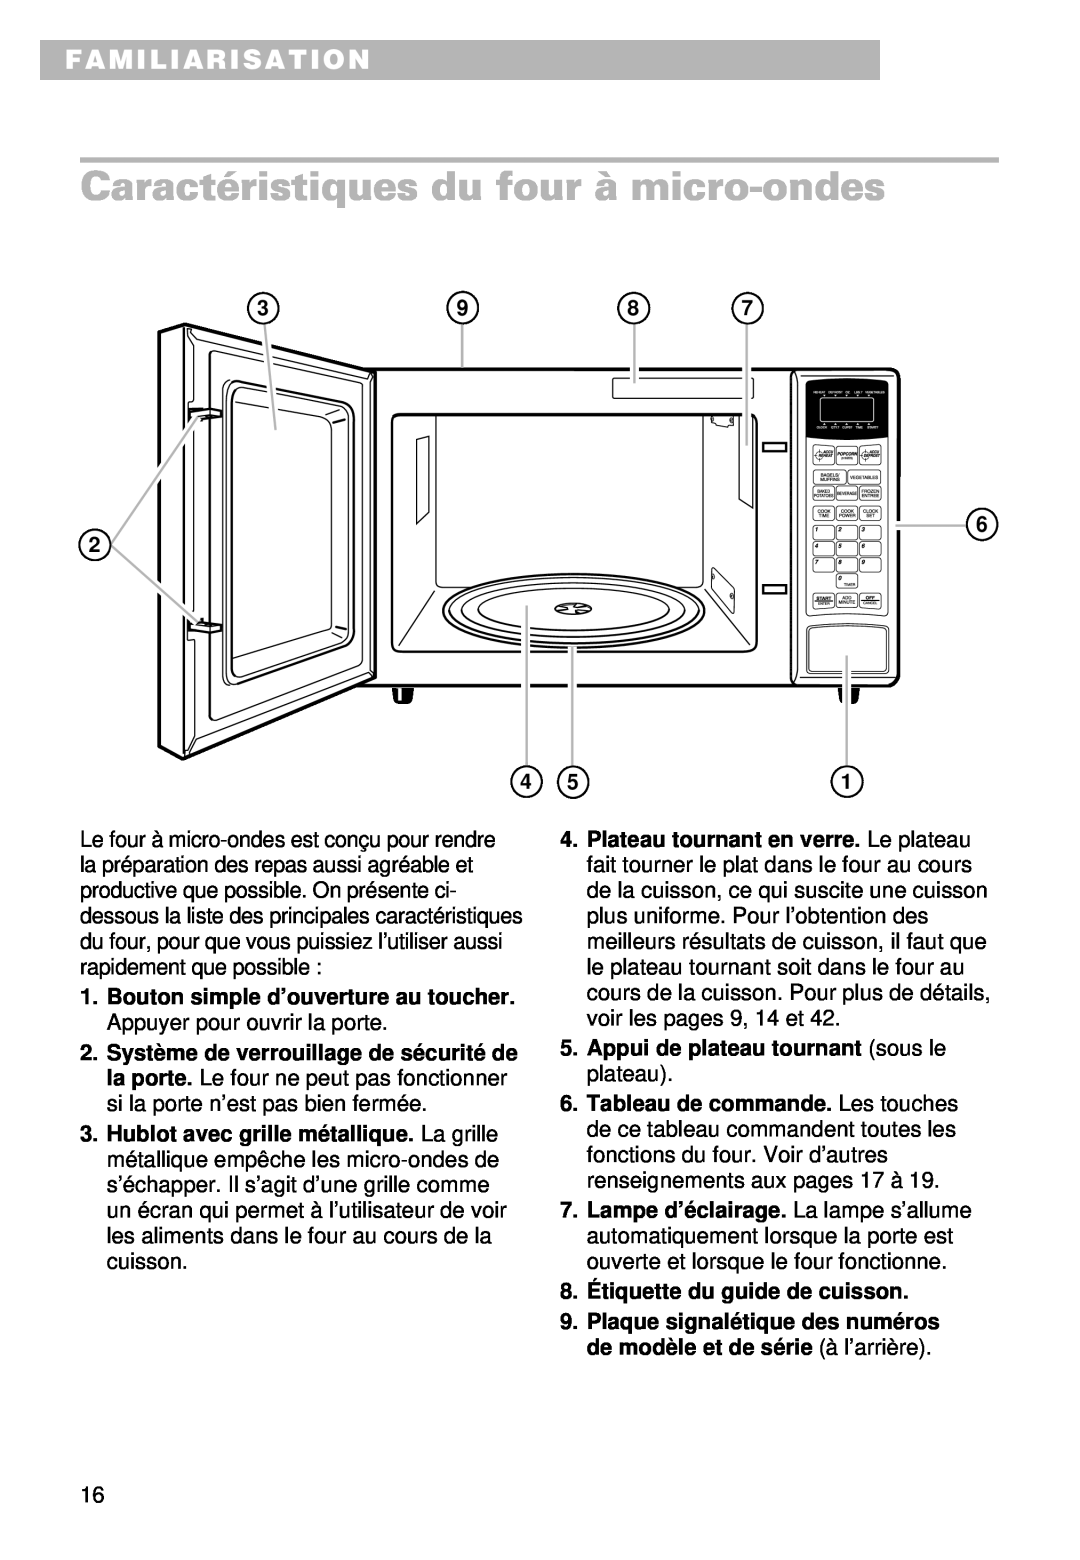 Whirlpool MT9100SF, YMT9101SF, YMT9090SF installation instructions Caractéristiques du four à micro-ondes, Familiarisation 